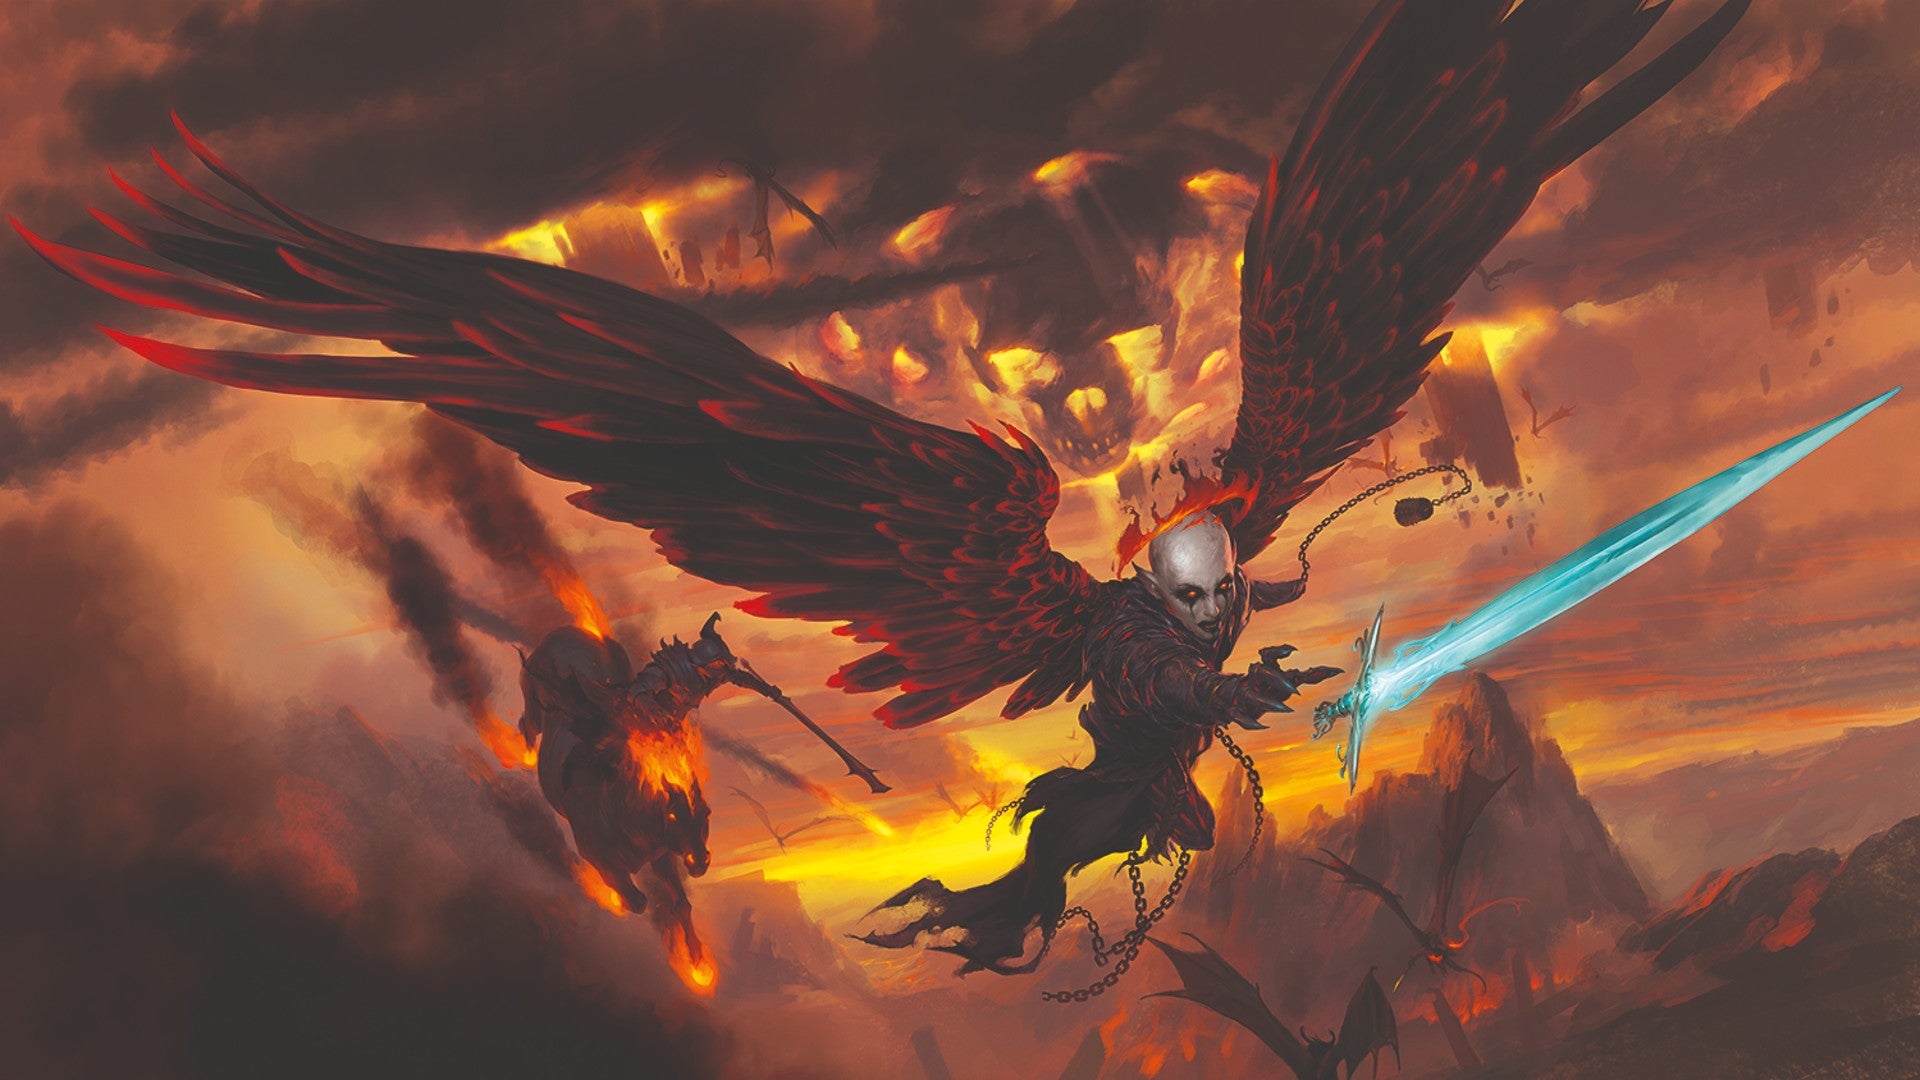 Baldur's Gate: Descent into Avernus cover art, showing a winged fiend flying through hell, while another rides atop a fiery horse.